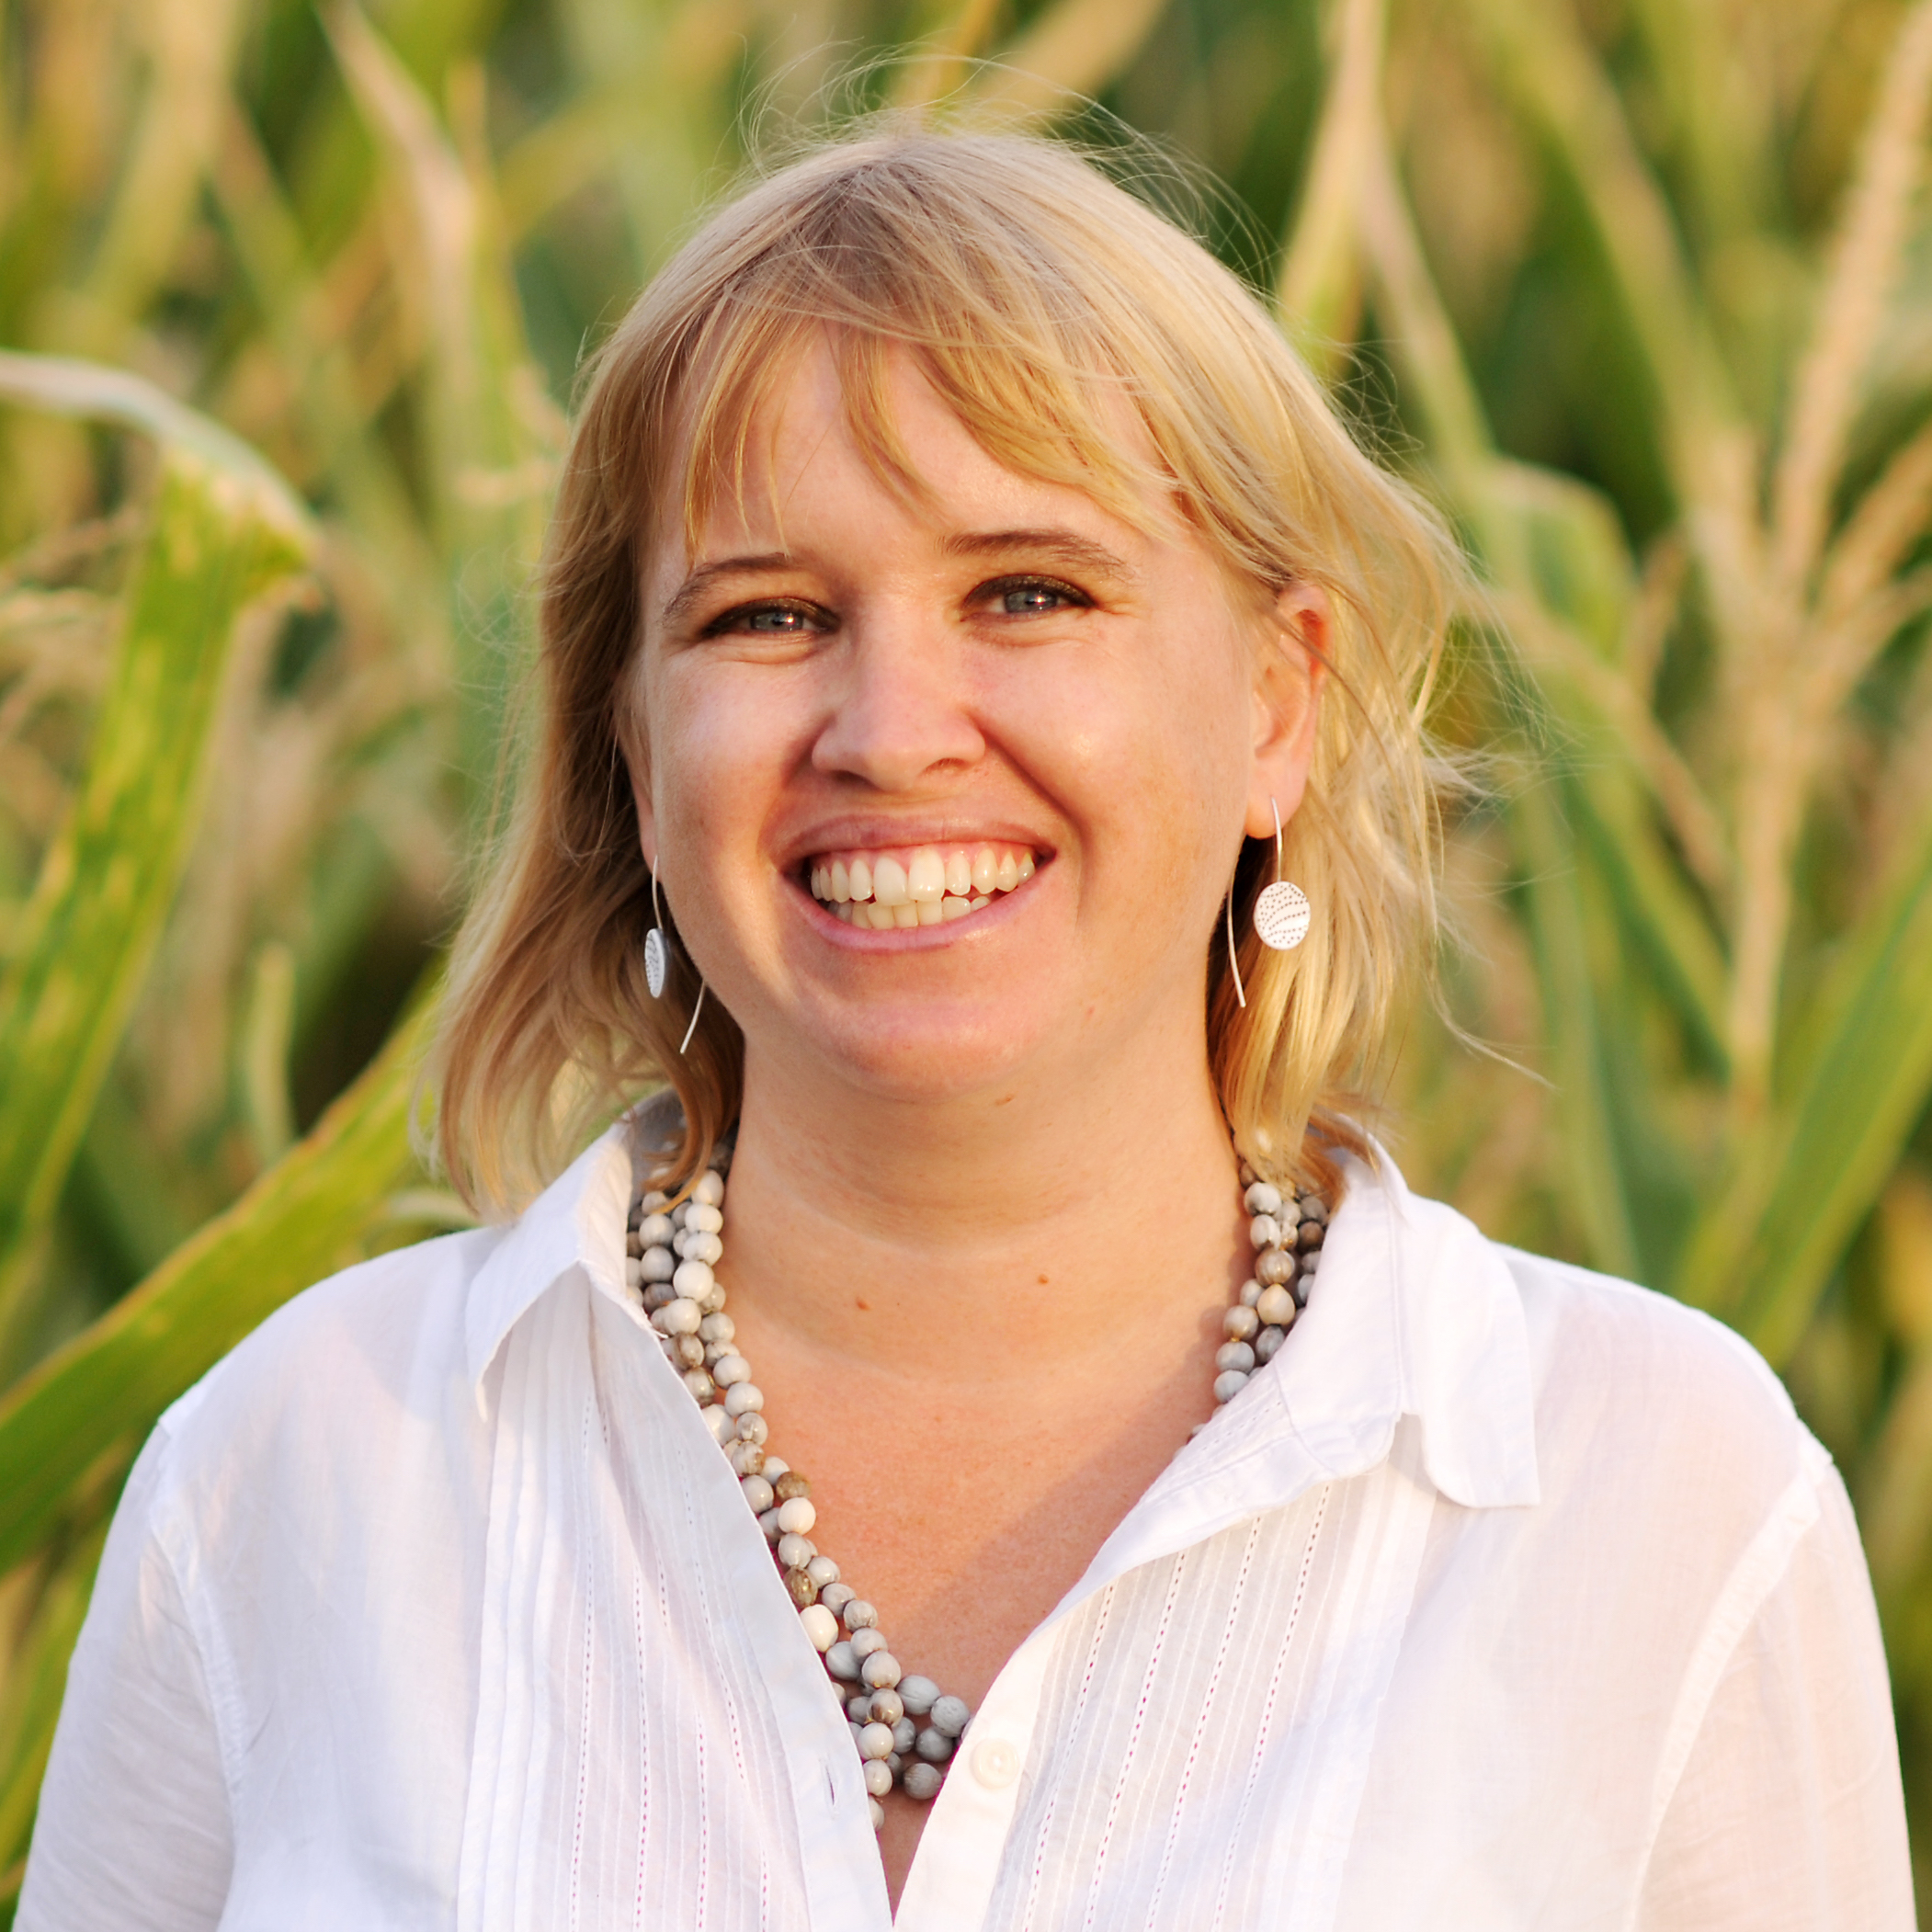 Picture of a smiling woman with shoulder-length blonde hair in front of a corn field